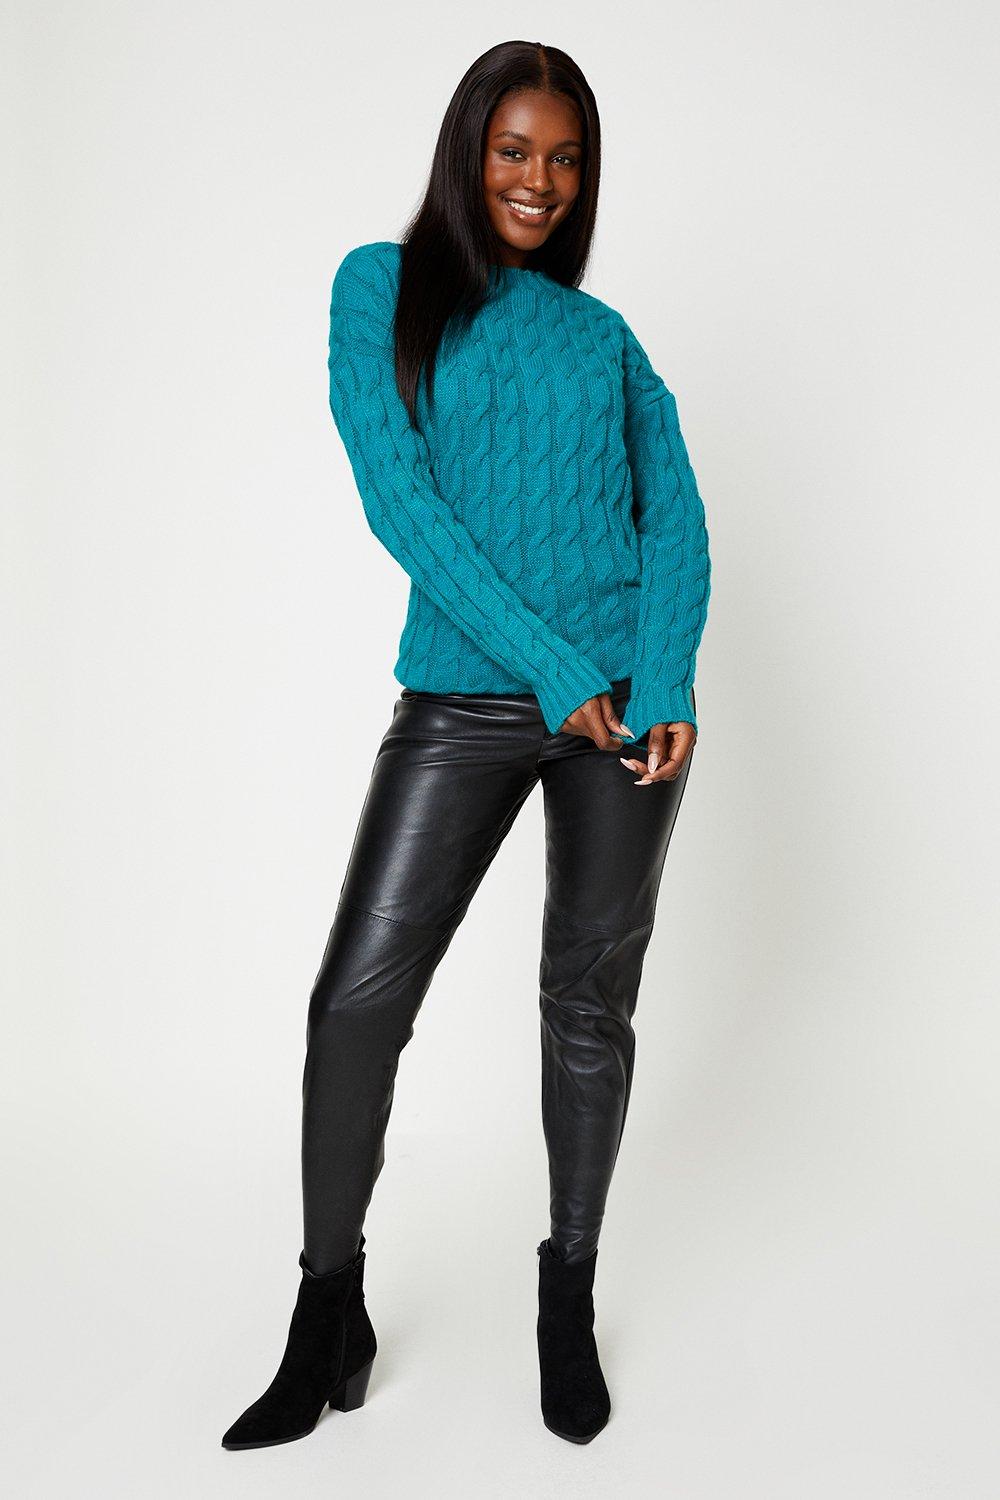 Women's Long Sleeve Cable Knit Jumper - green - S